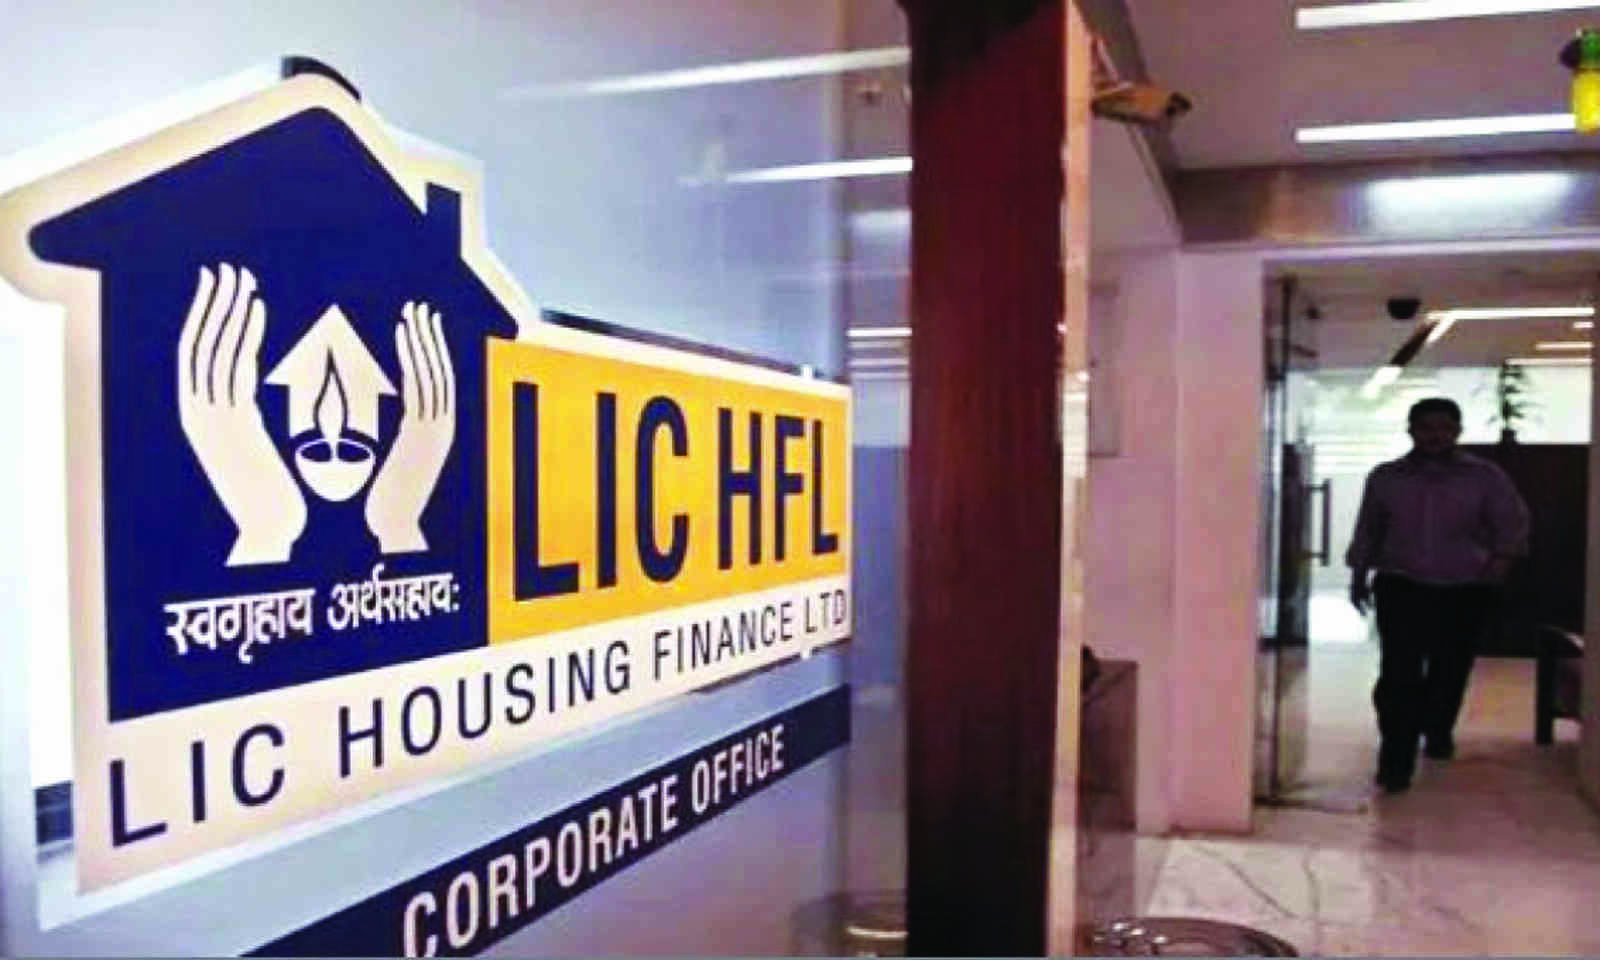 Fresher Jobs] LIC Housing Finance Managers Recruitment 2022 |  BankExamsIndia.com | All About IBPS Bank Exams, Govt Exams and Jobs